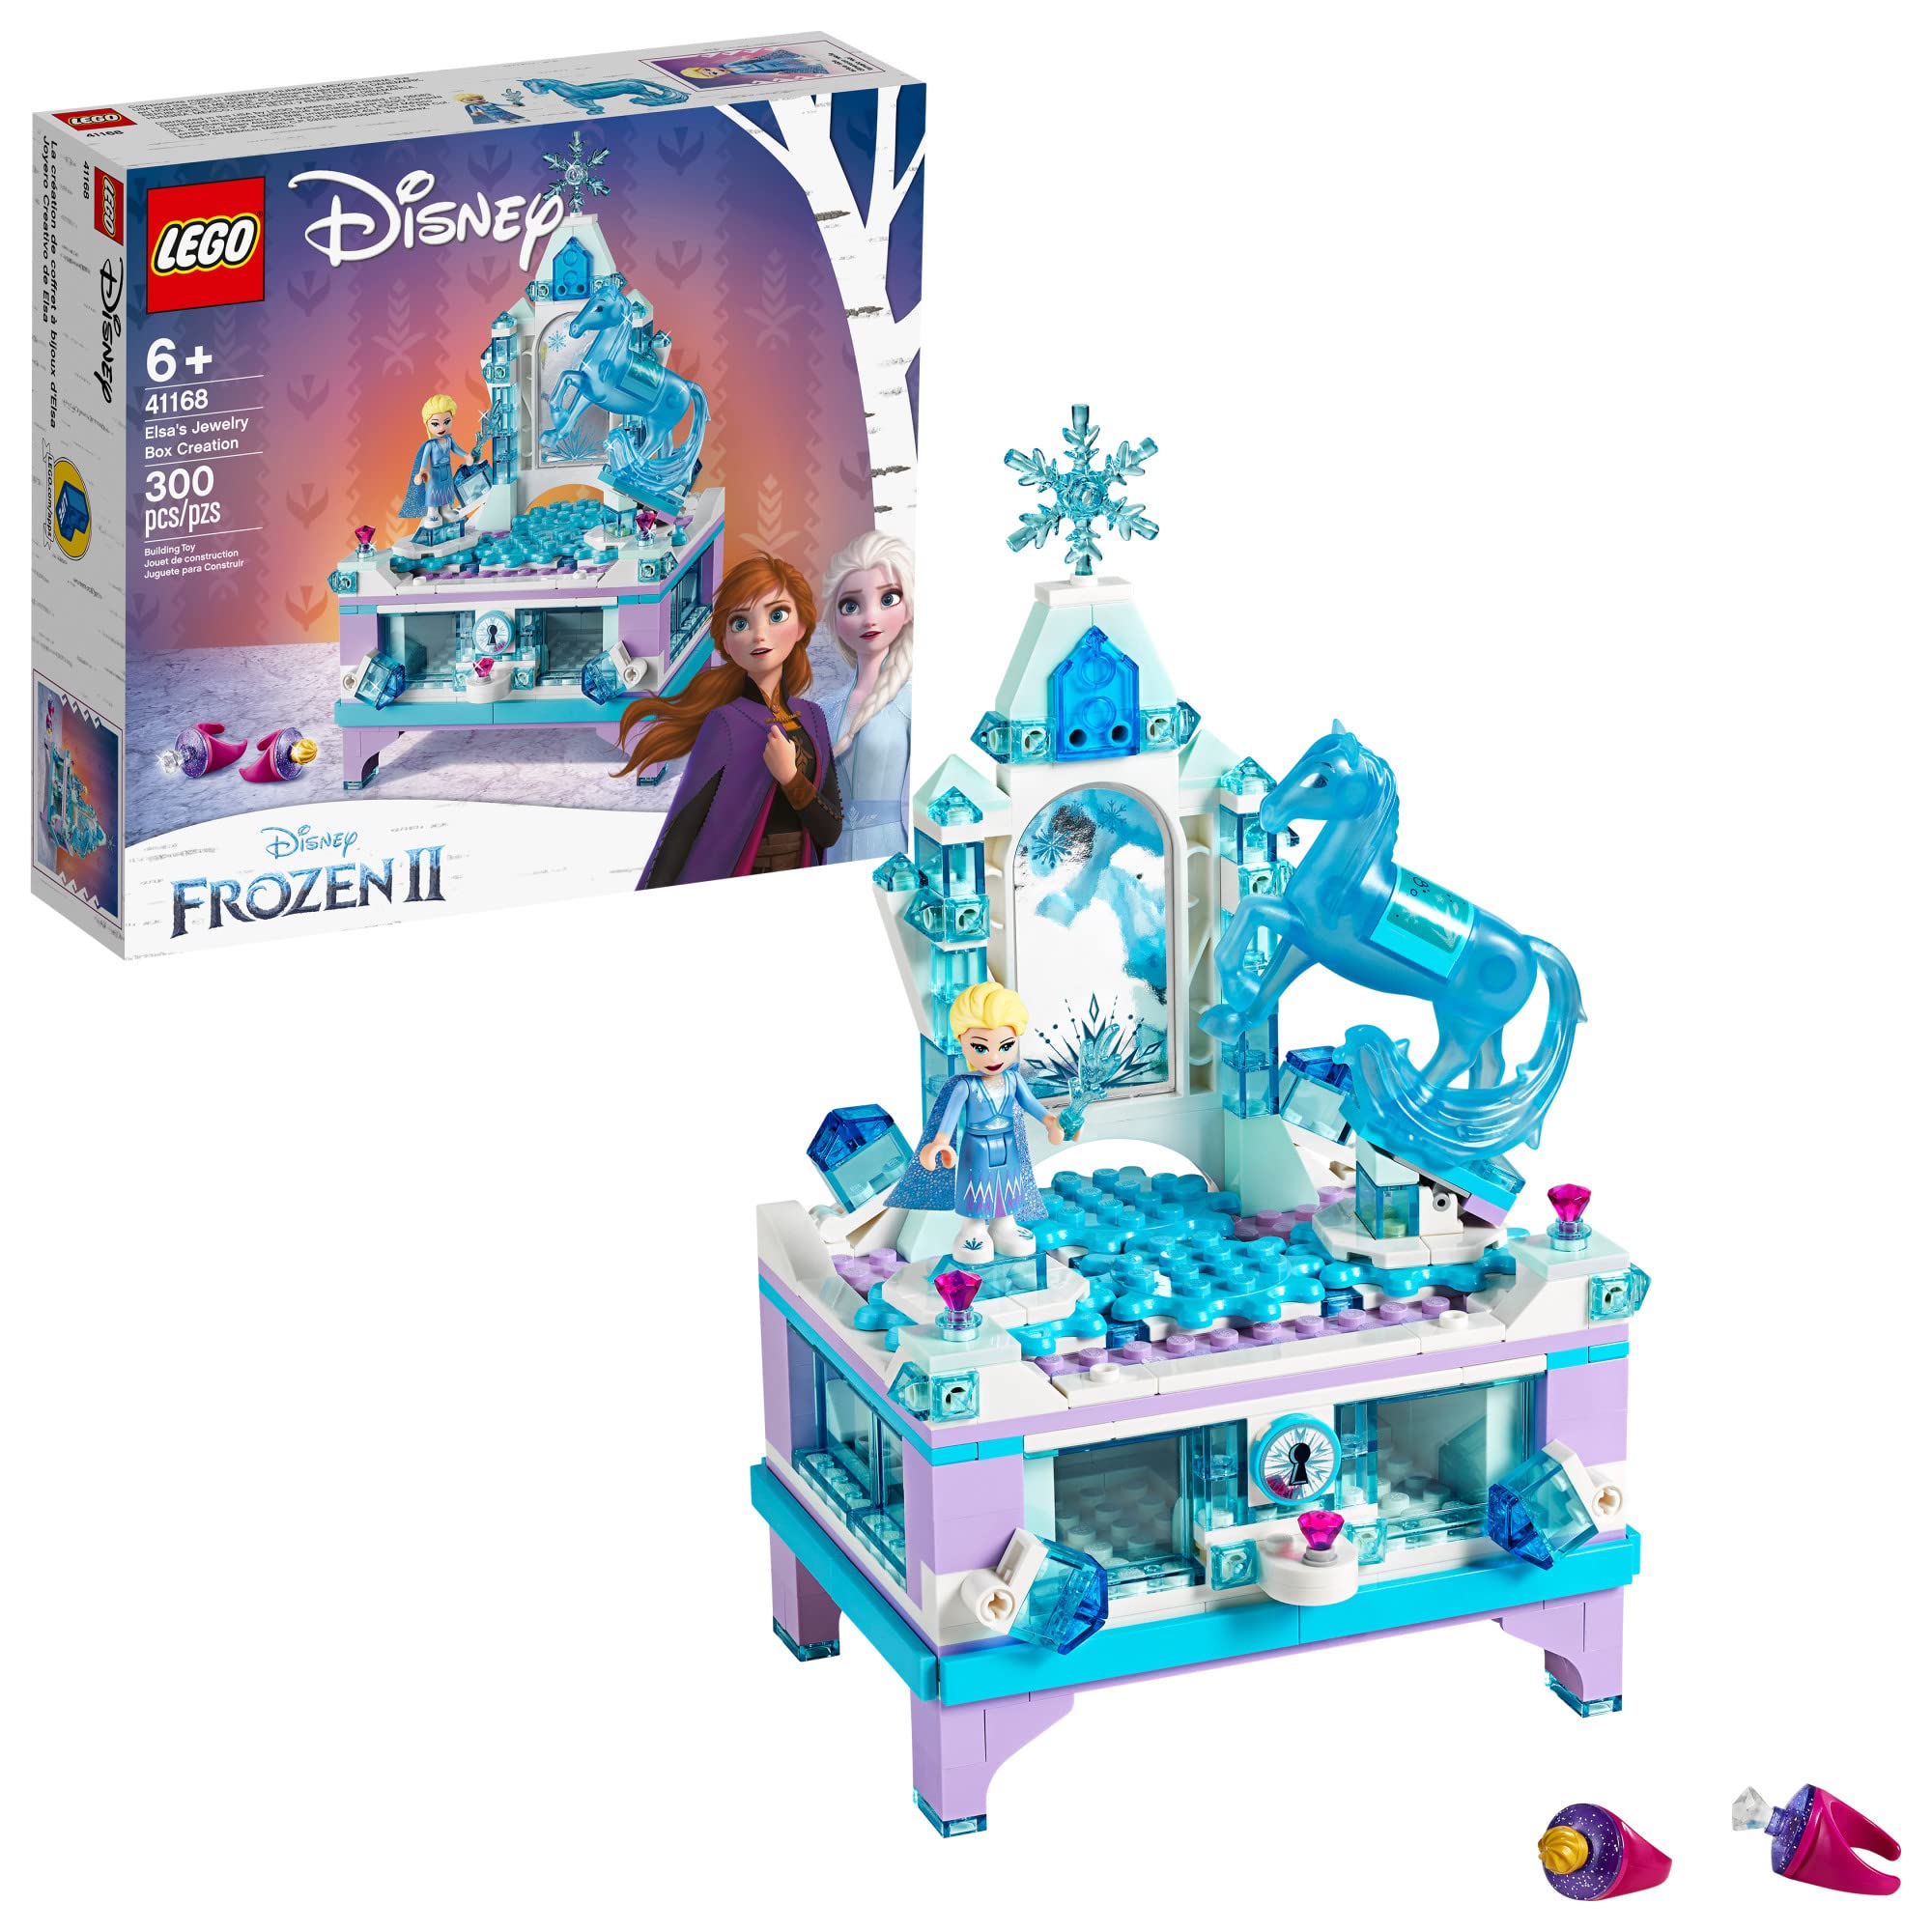 LEGO Disney Frozen 2 Elsa's Jewelry Box Creation 41168, Collectible Frozen Toy with Princess Elsa Mini-Doll and Nokk Figure, Kids Can Build a Jewelry Box with Lockable Drawer & Mirror, Disney Gift